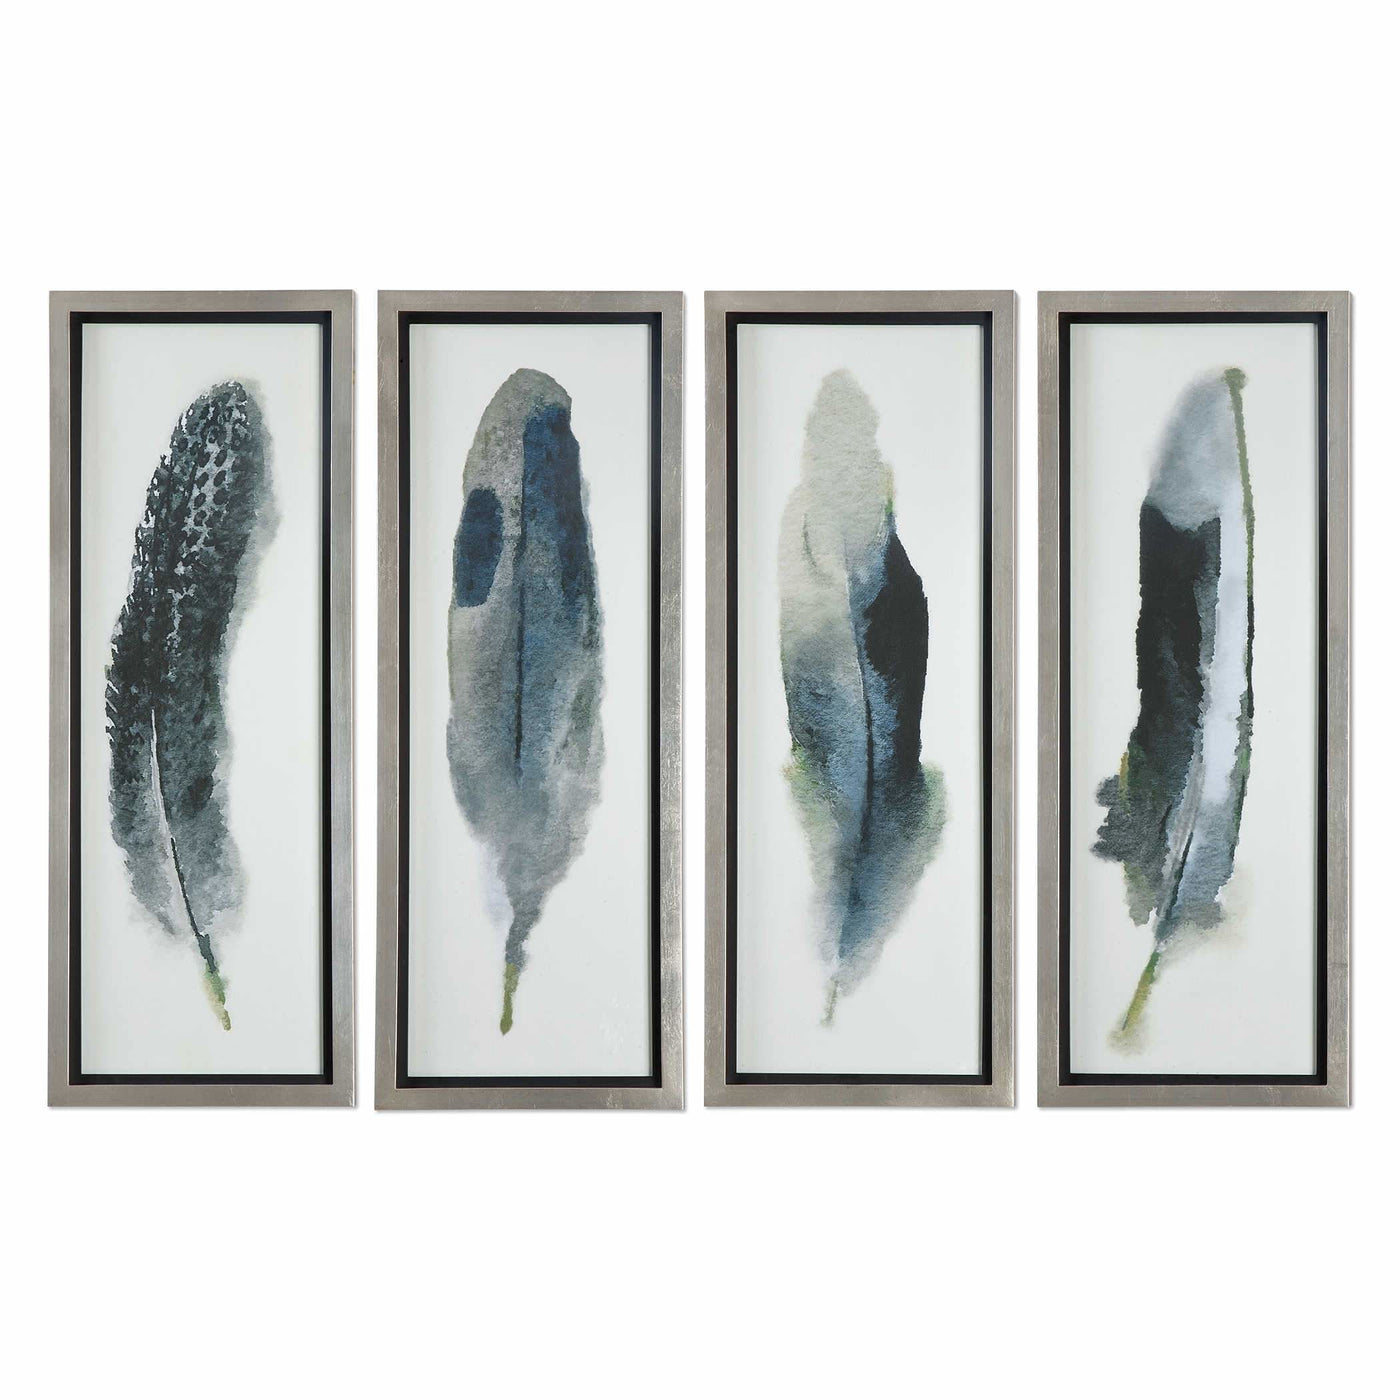 Feathered Beauty Framed Prints, Set of 4 